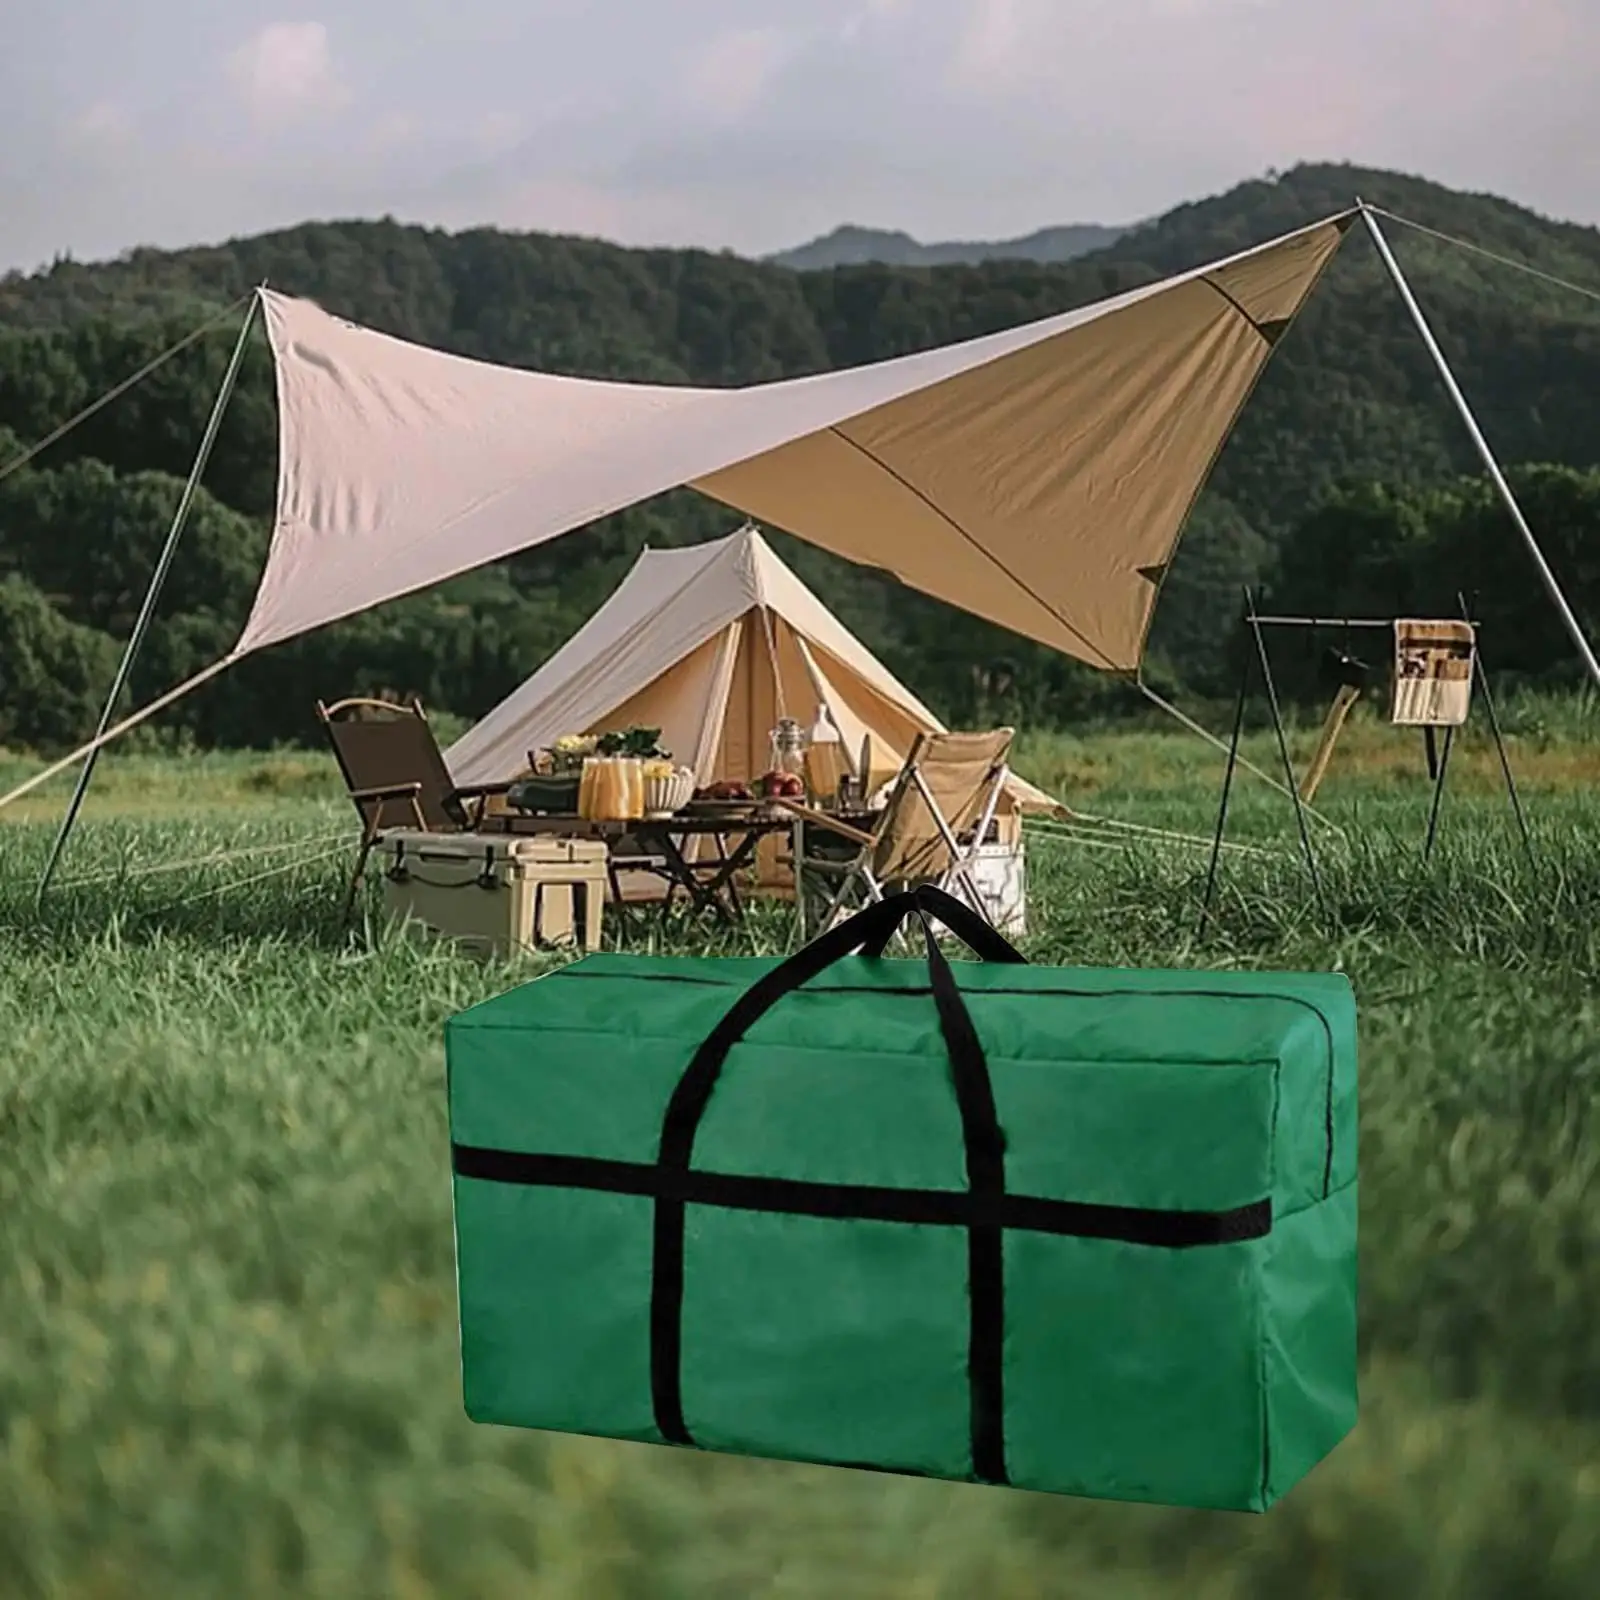 Tent Stakes Storage Bag Portable Utility Tote Bag Durable Tent Pegs Pouch for Camp Tarp Self Driving Tour Outdoor Sports Beach